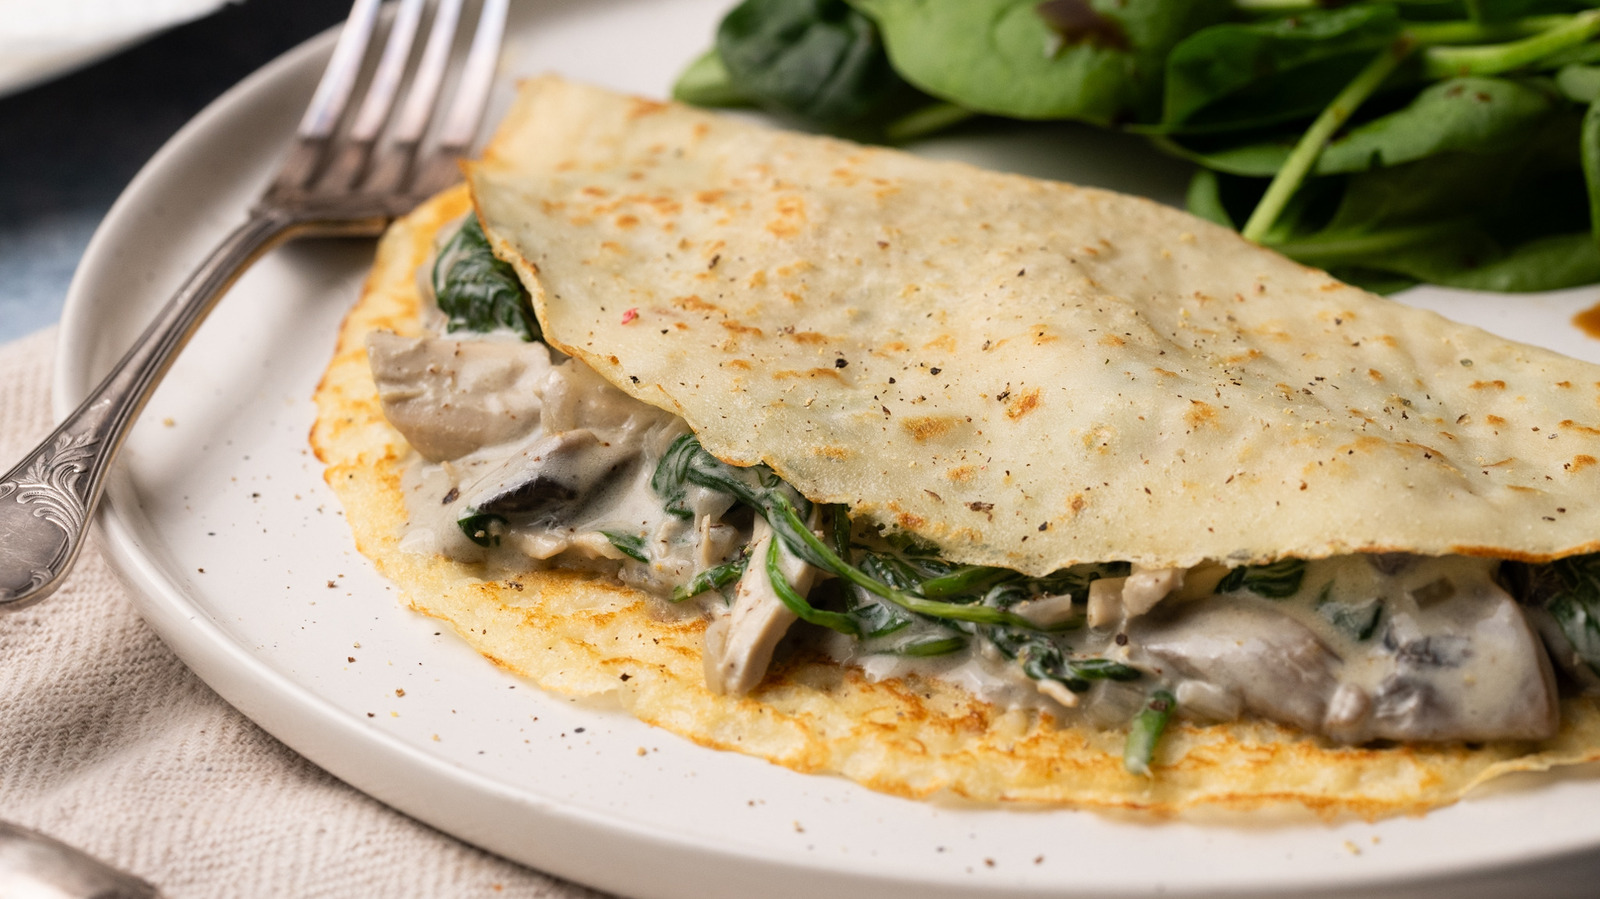 Crepe recipe stuffed with spinach, turkey and mushrooms